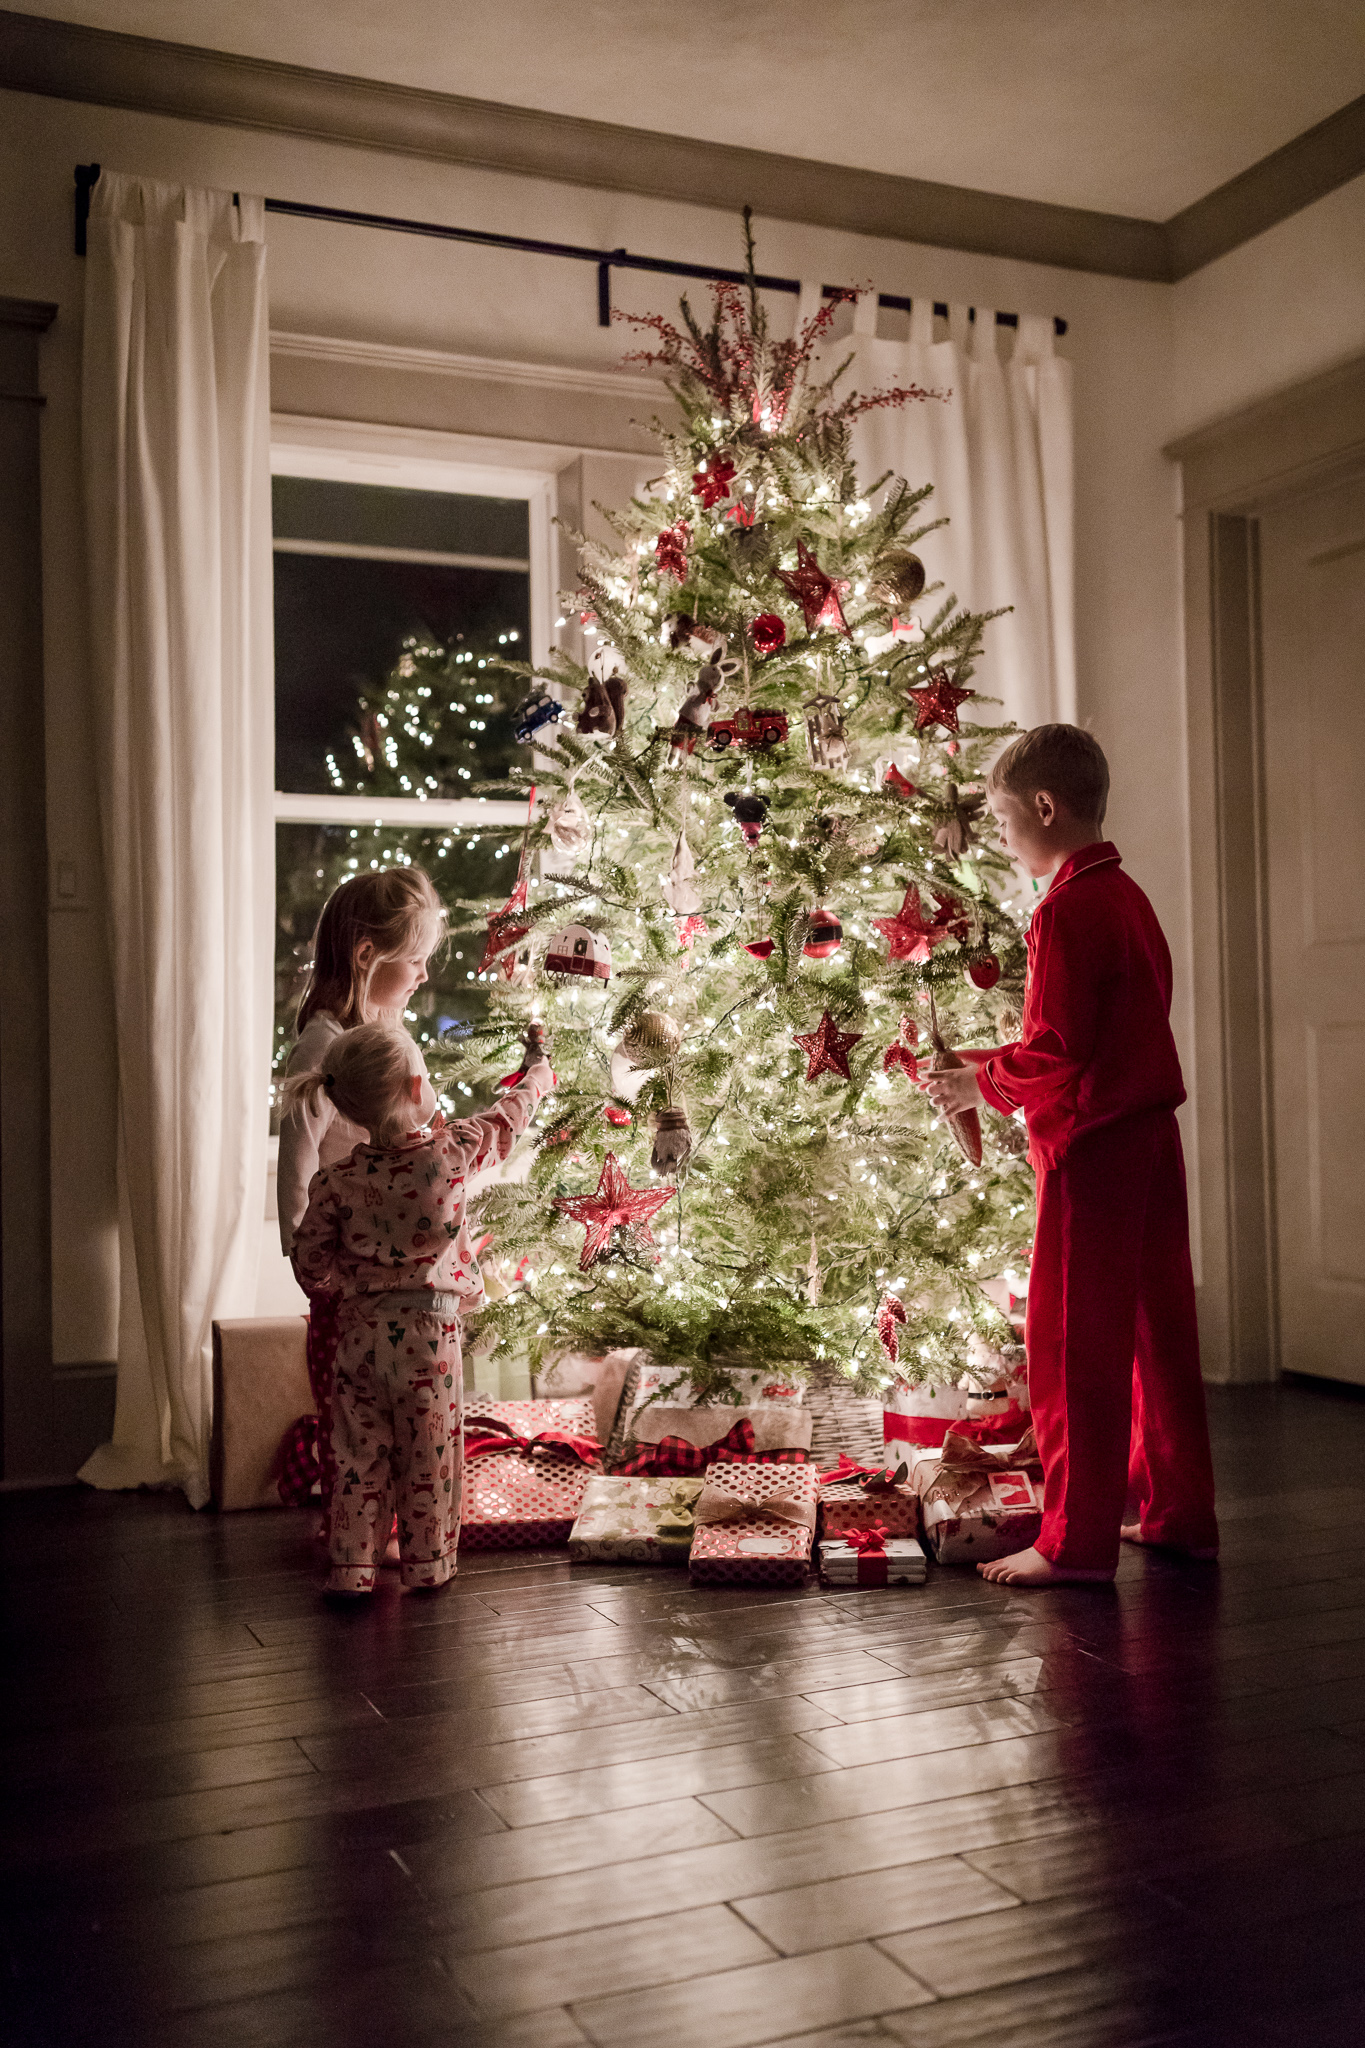 Magical Photos by the Christmas Tree